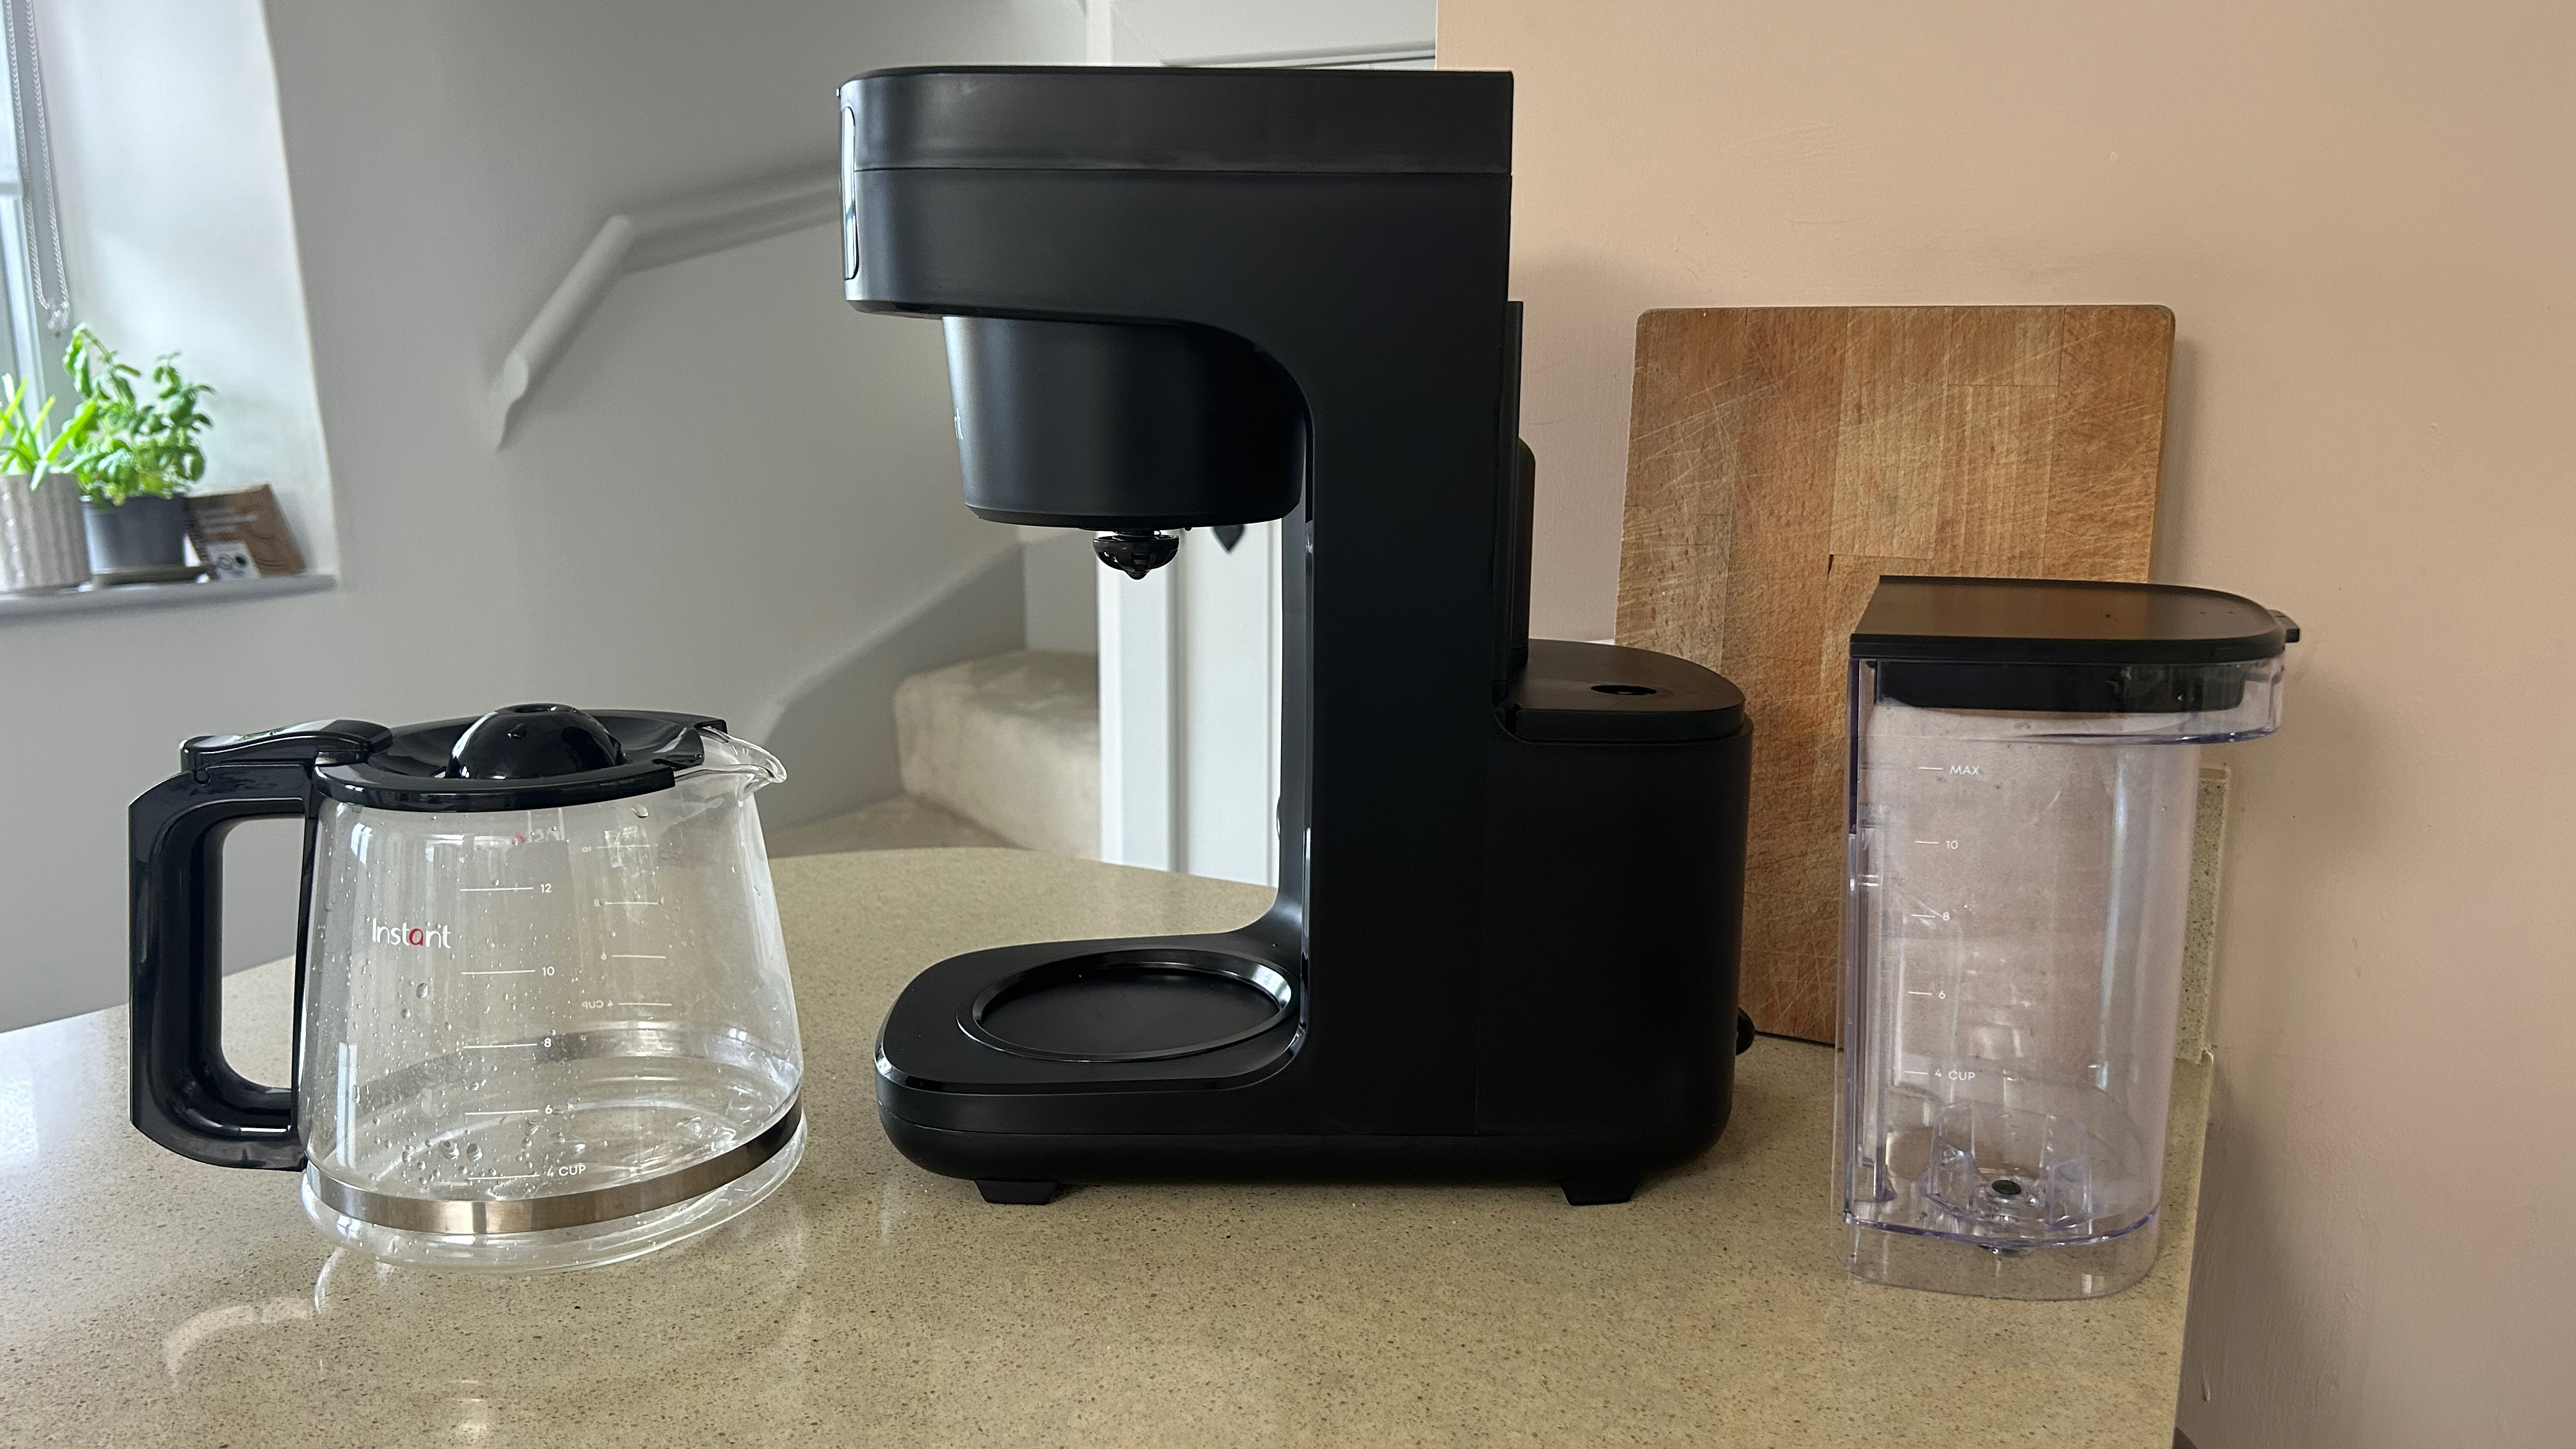 The different compartments of the Instant Infusion Brew coffee maker